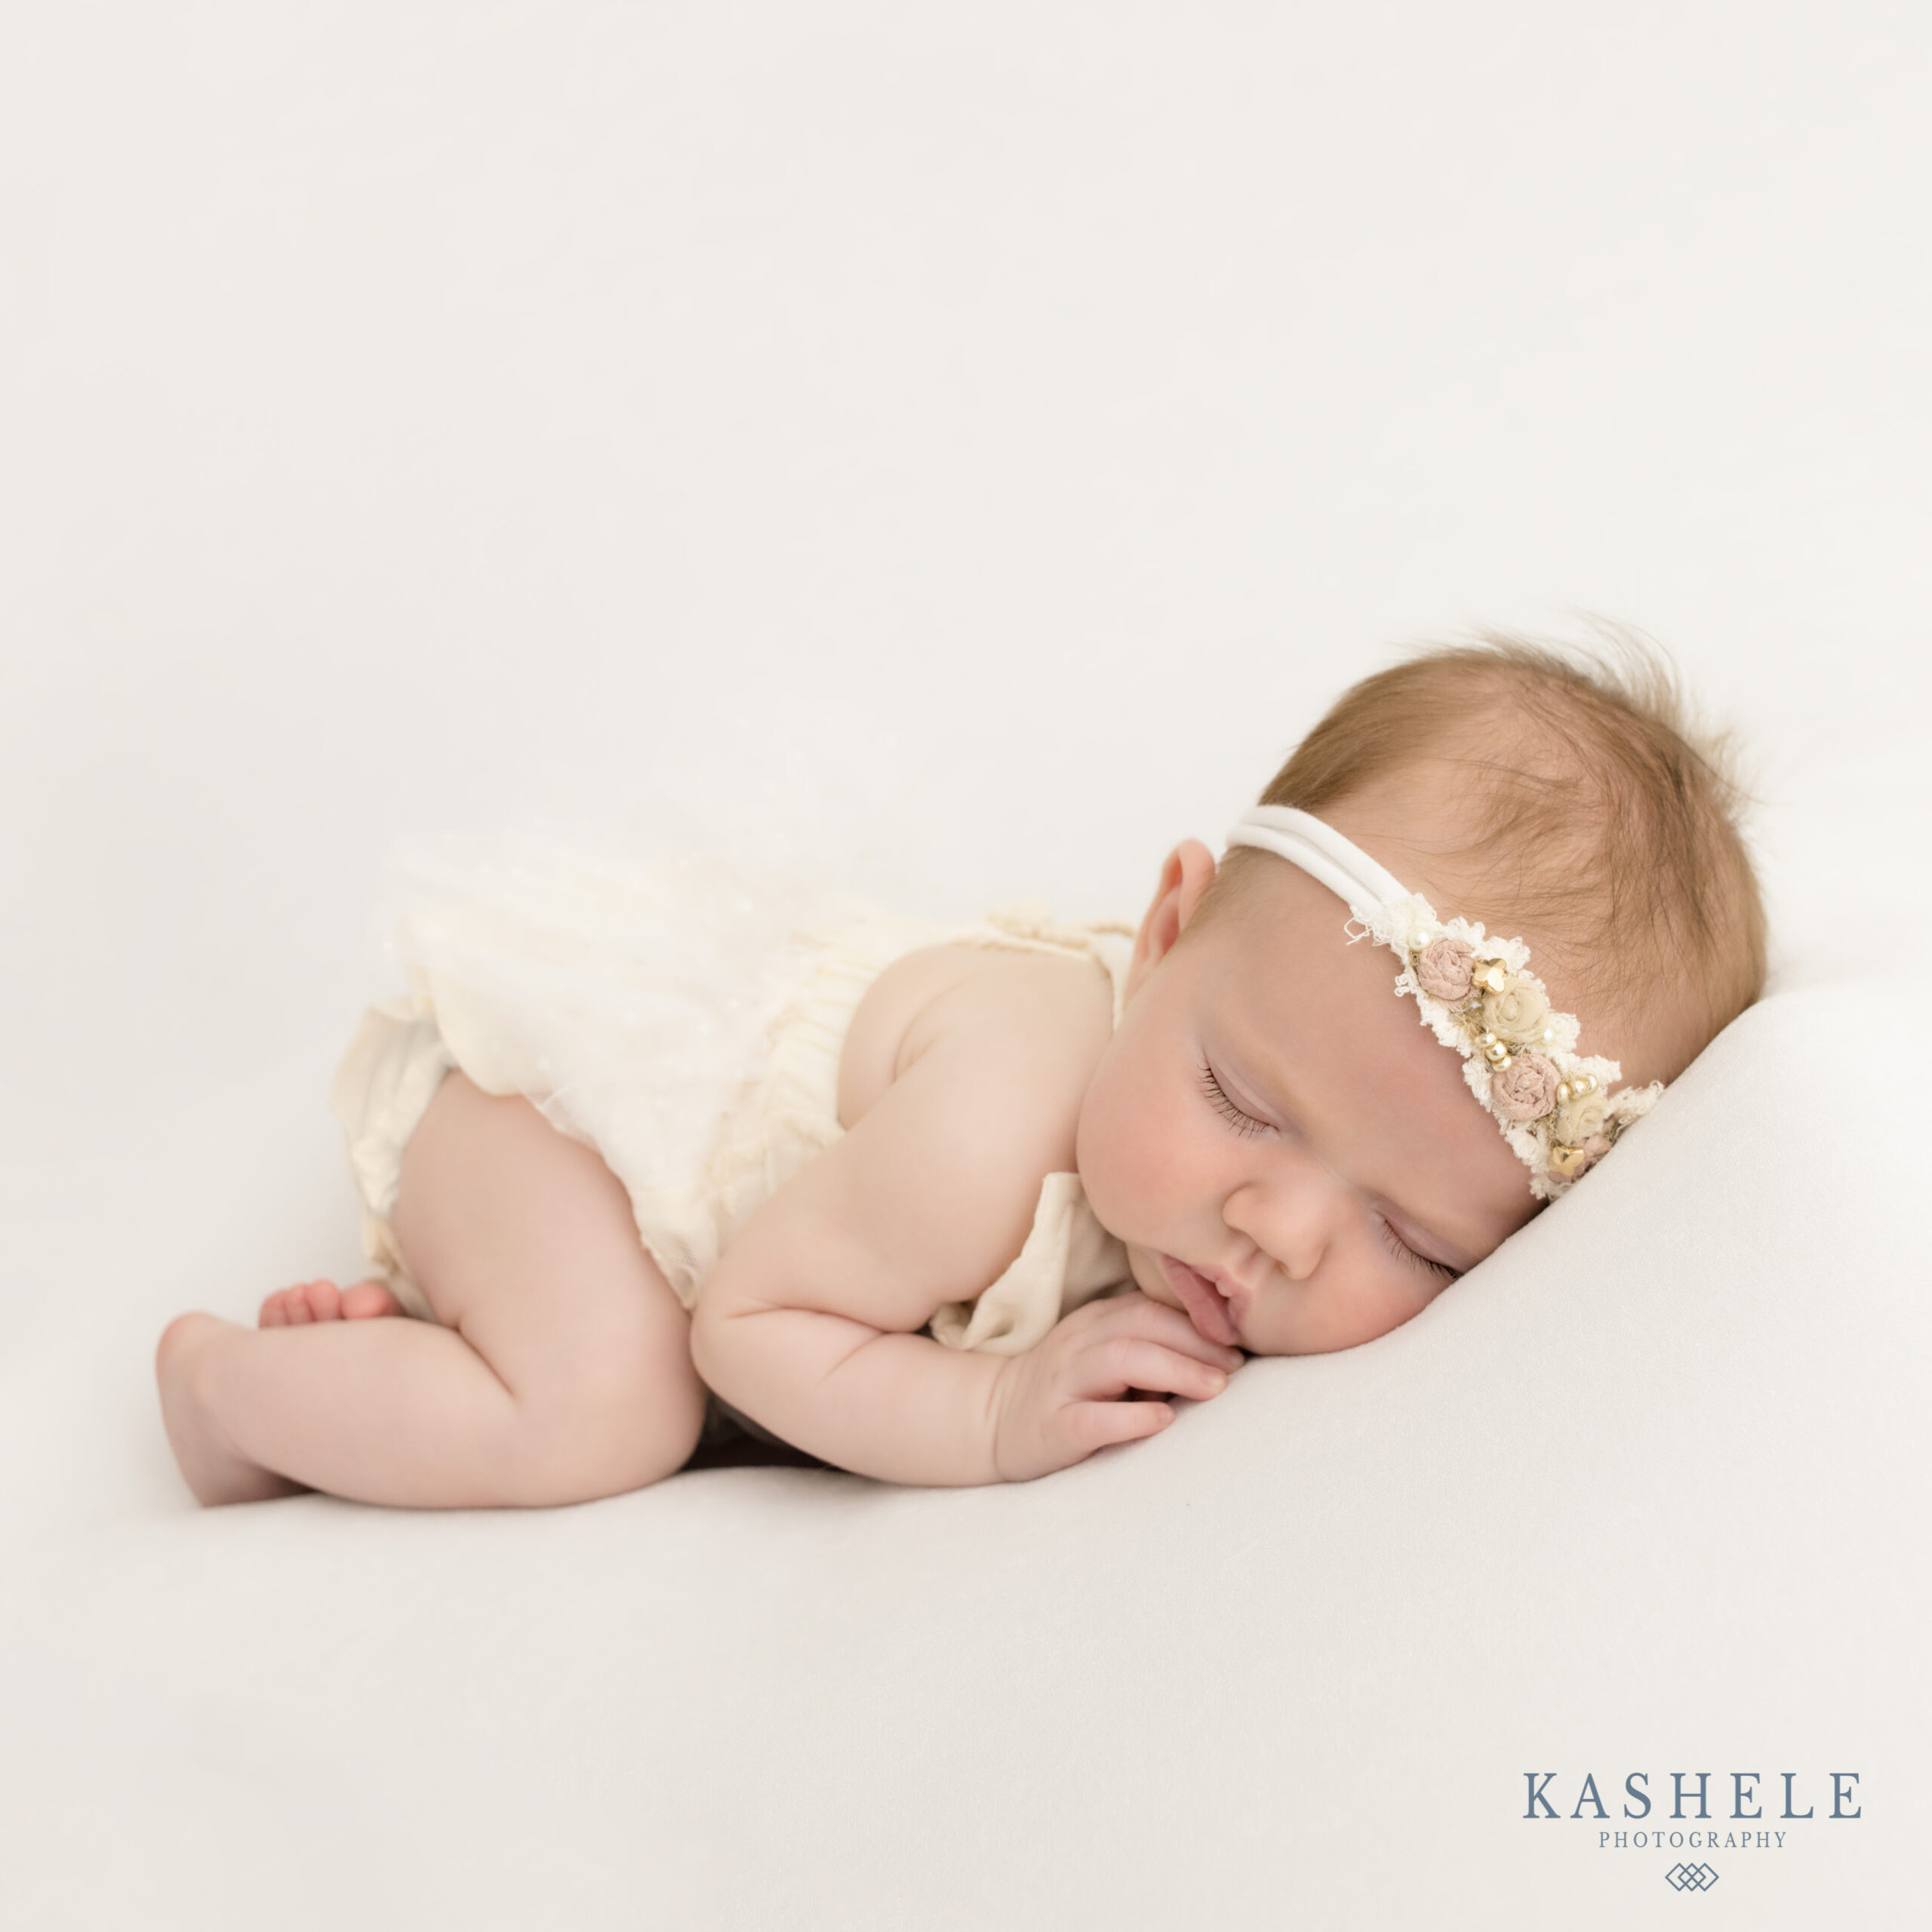 Baby photoshoot ideas at home / coins /2nd month | Born baby photos, Baby  girl newborn photos, Newborn baby photoshoot